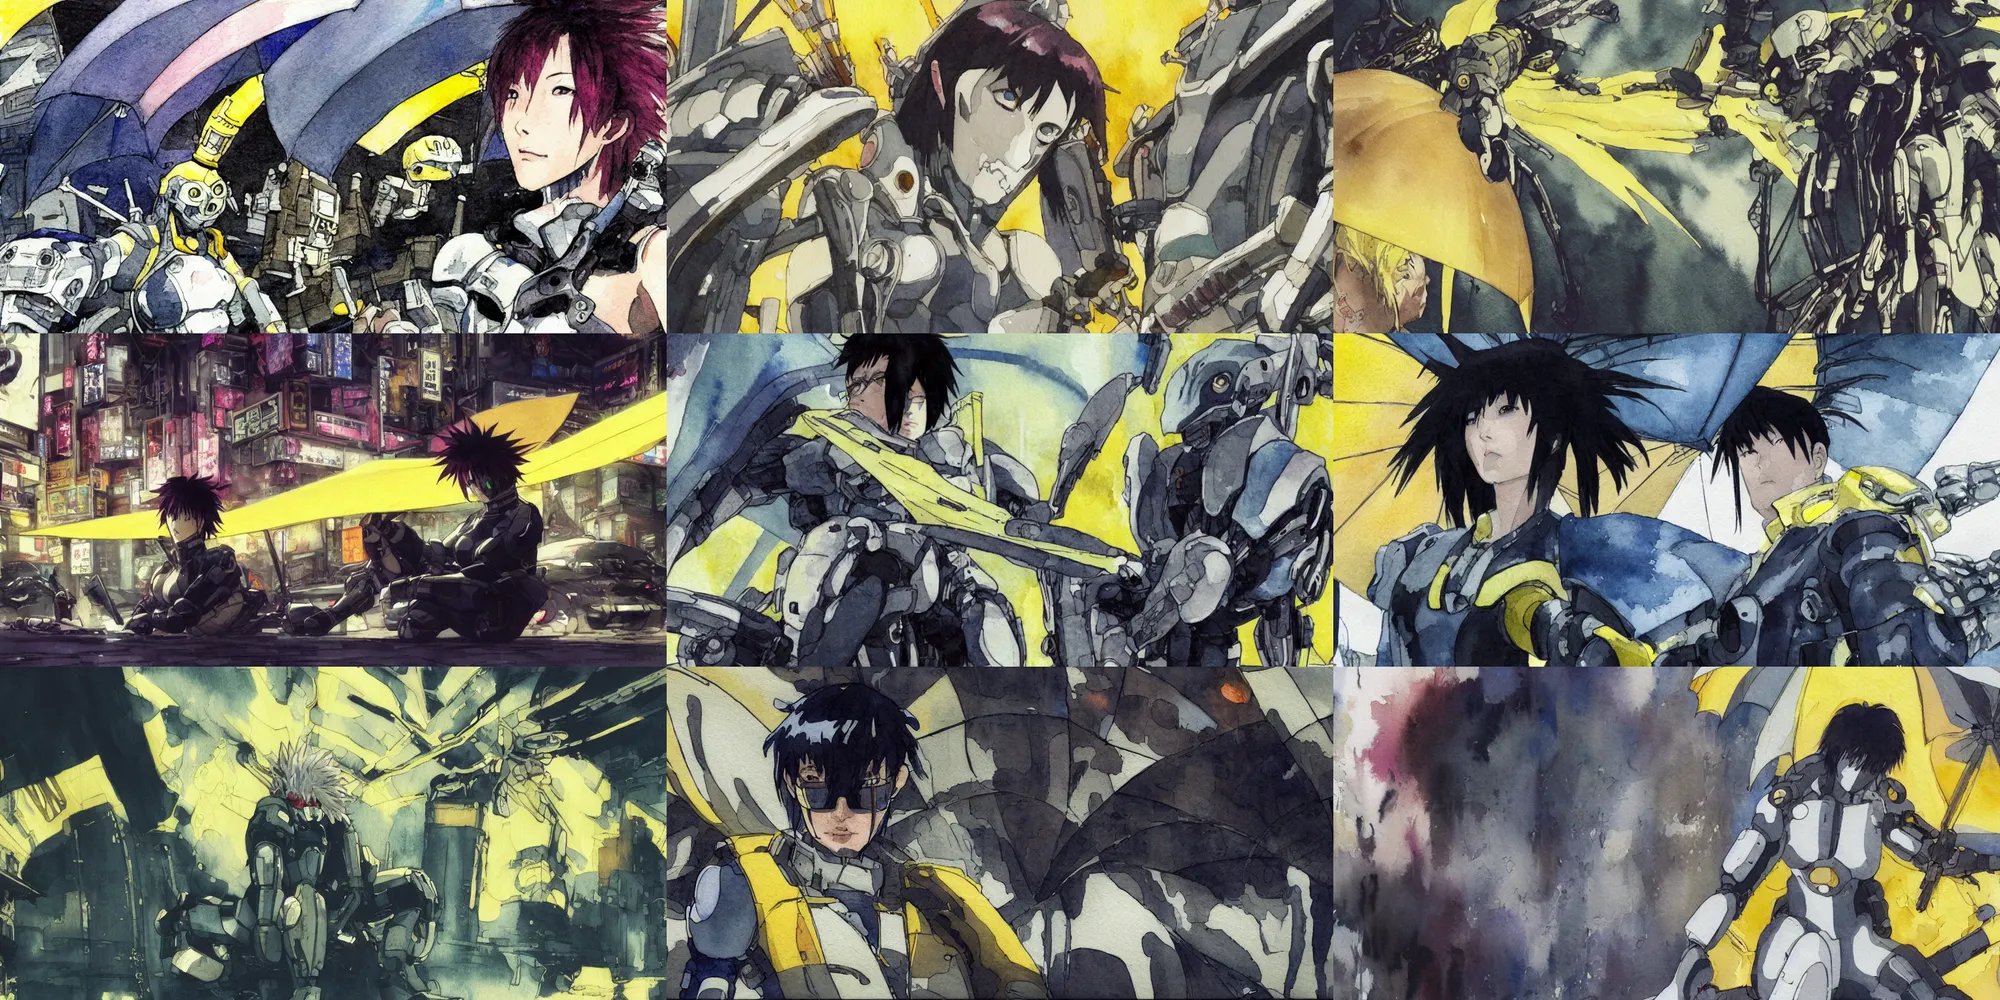 Prompt: incredible wide screenshot, simple watercolor, masamune shirow ghost in the shell movie scene close up broken Kusanagi sitting under a striped yellow and white umbrella in deserted shinjuku, chameleon face muscle robot monster in the background, ghost, teeth,black smoke, pale yellow sky, sunset, bright flash, texture, strange, impossible, fur, spines, mouth, laser, brain, shell, fight, potato skin, brown mud, dust, titanic tank with legs, robot arm, ripped to shreds, bored expression, overhead wires, telephone pole, sparks, lightning, electricity, light rain, shinjuku, cherry blossom, hd, 4k, remaster, dynamic camera angle, deep 3 point perspective, fish eye, dynamic scene